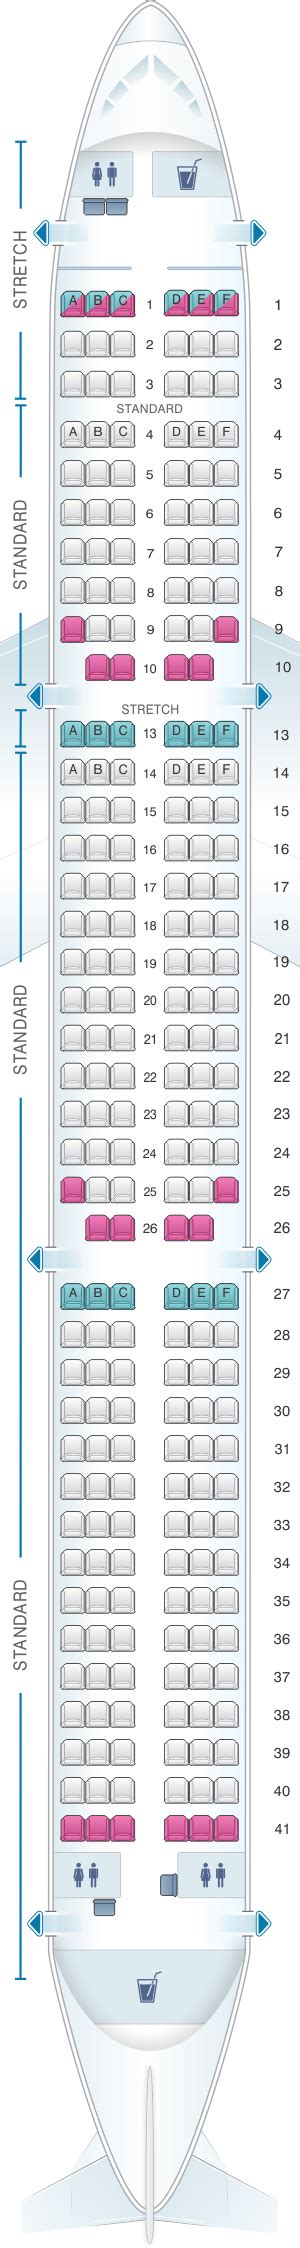 Seating Chart For Frontier Airlines